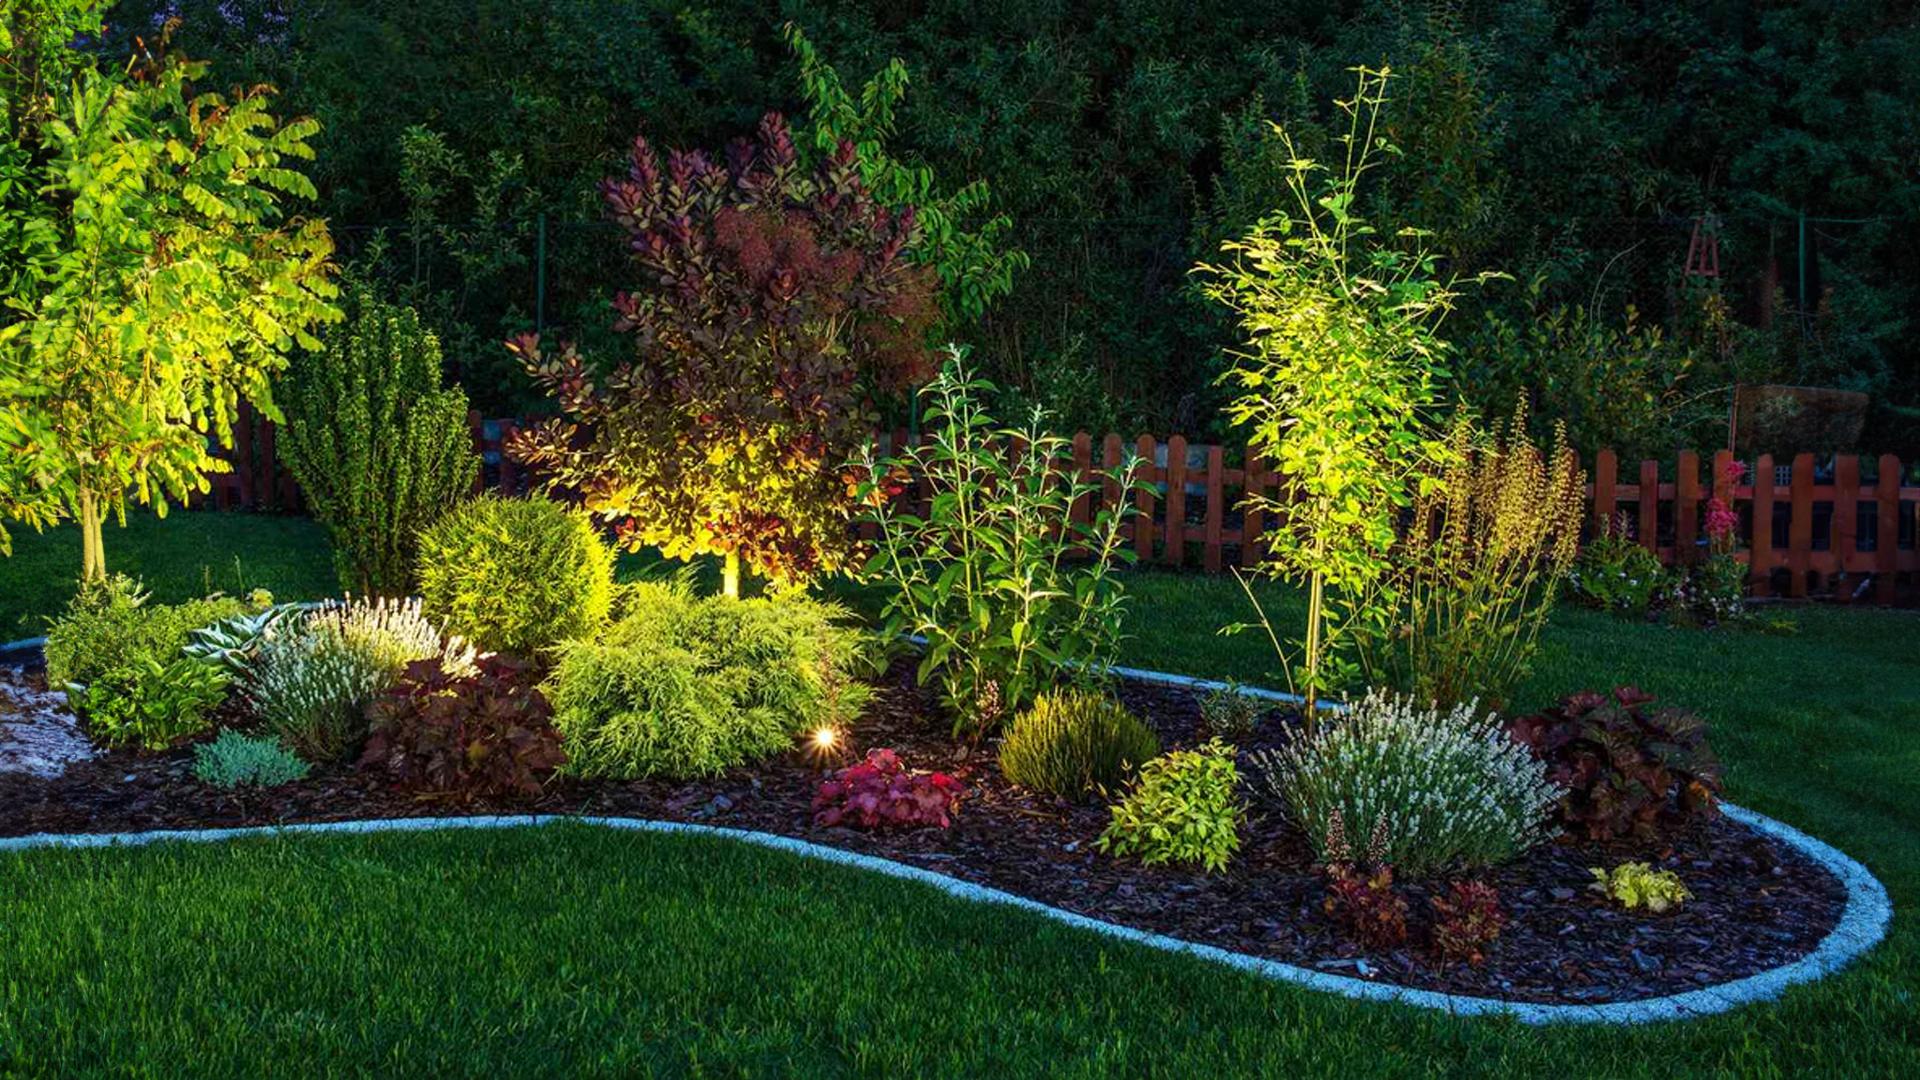 How to Conceal Landscape Lights and Wires